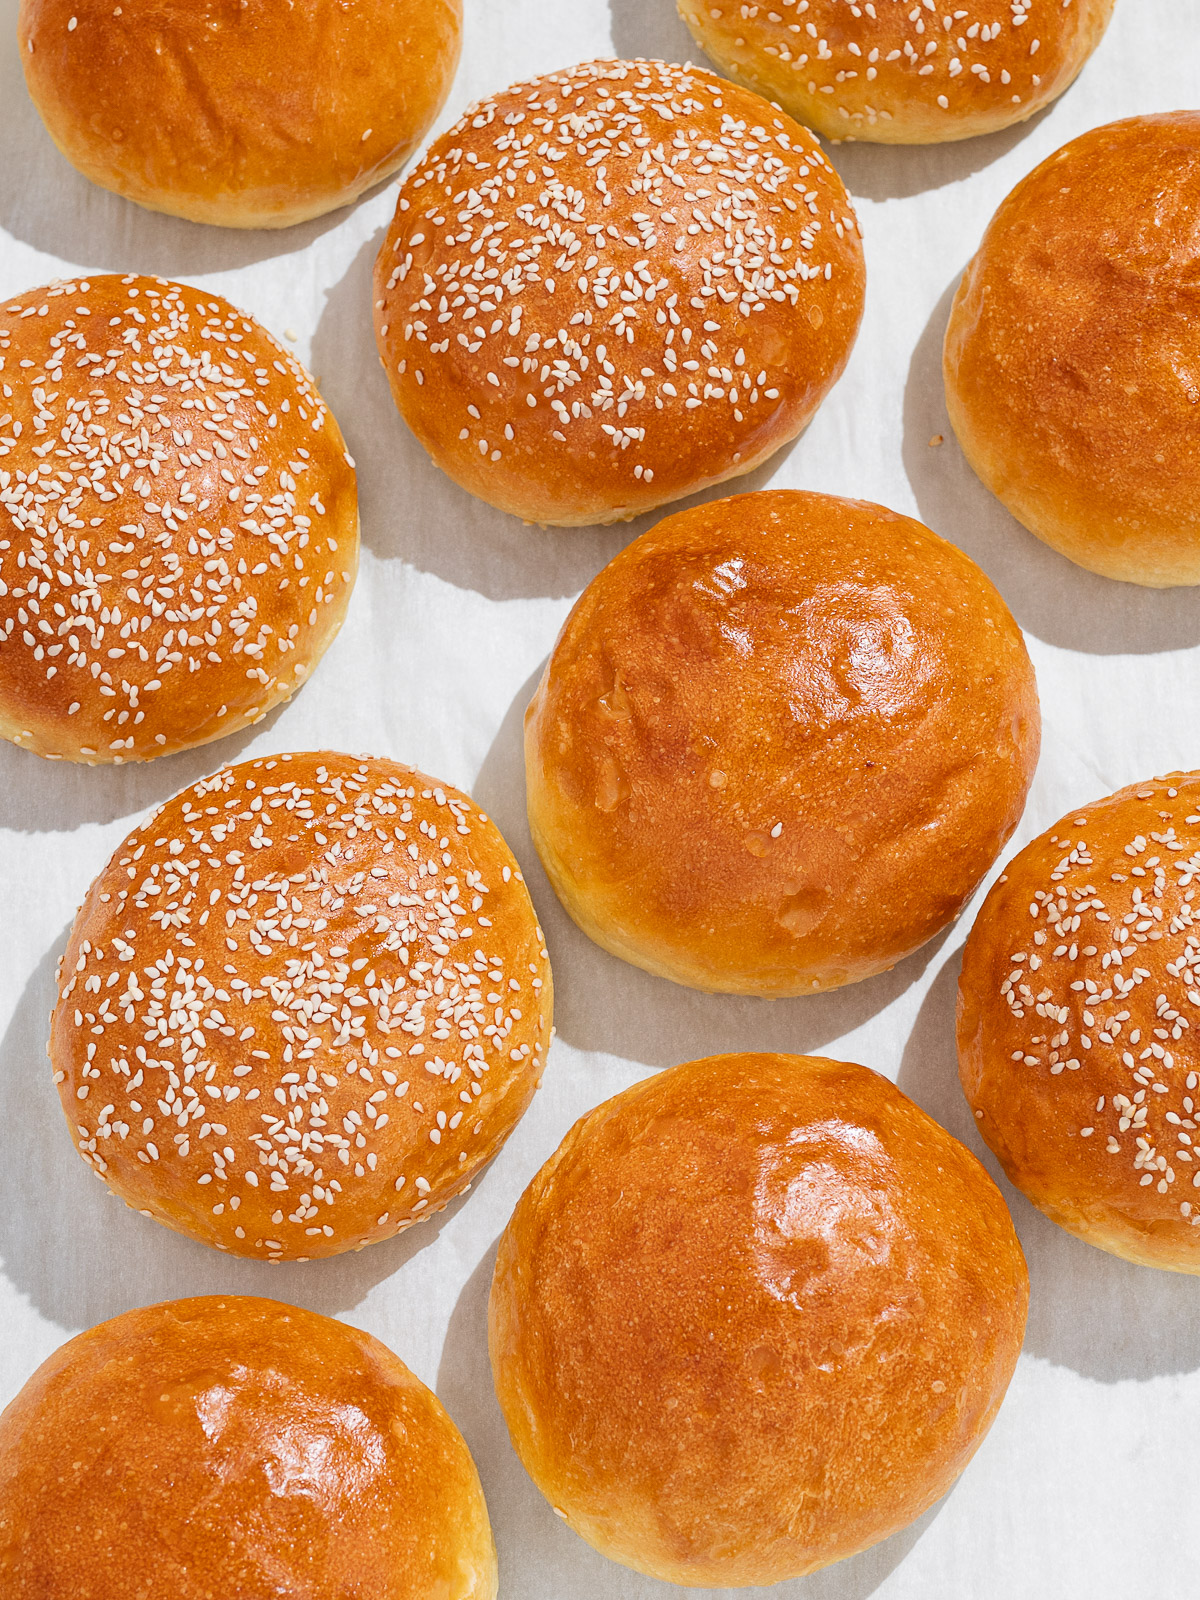 top view of many baked Light brioche buns in a row -some with sesame seeds and some without